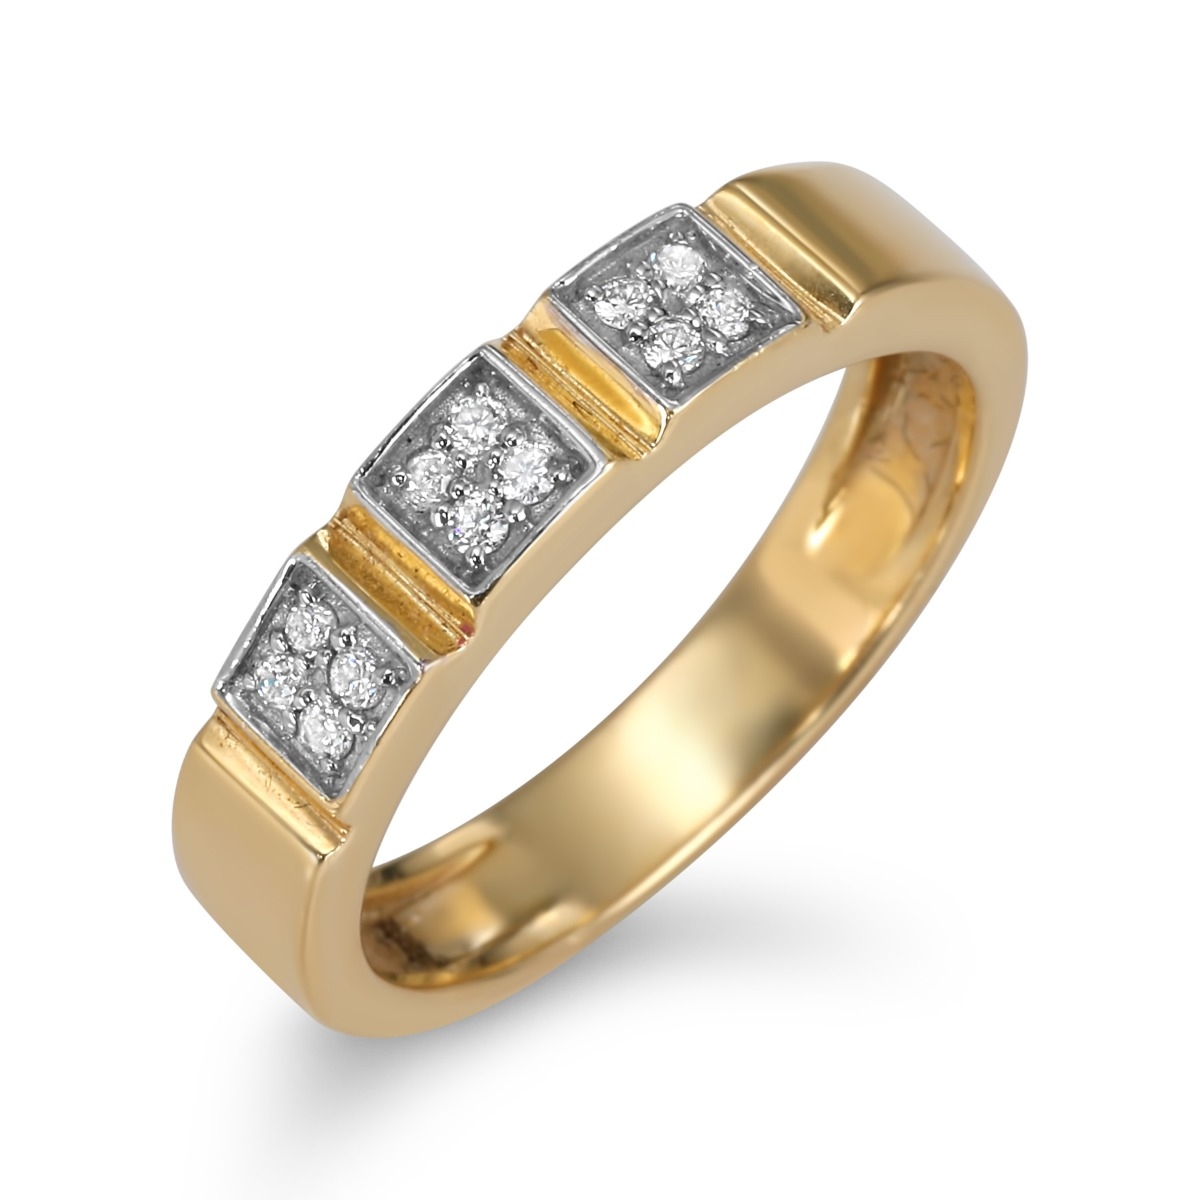 14K Gold Ring With Exquisite Diamond Settings - 1